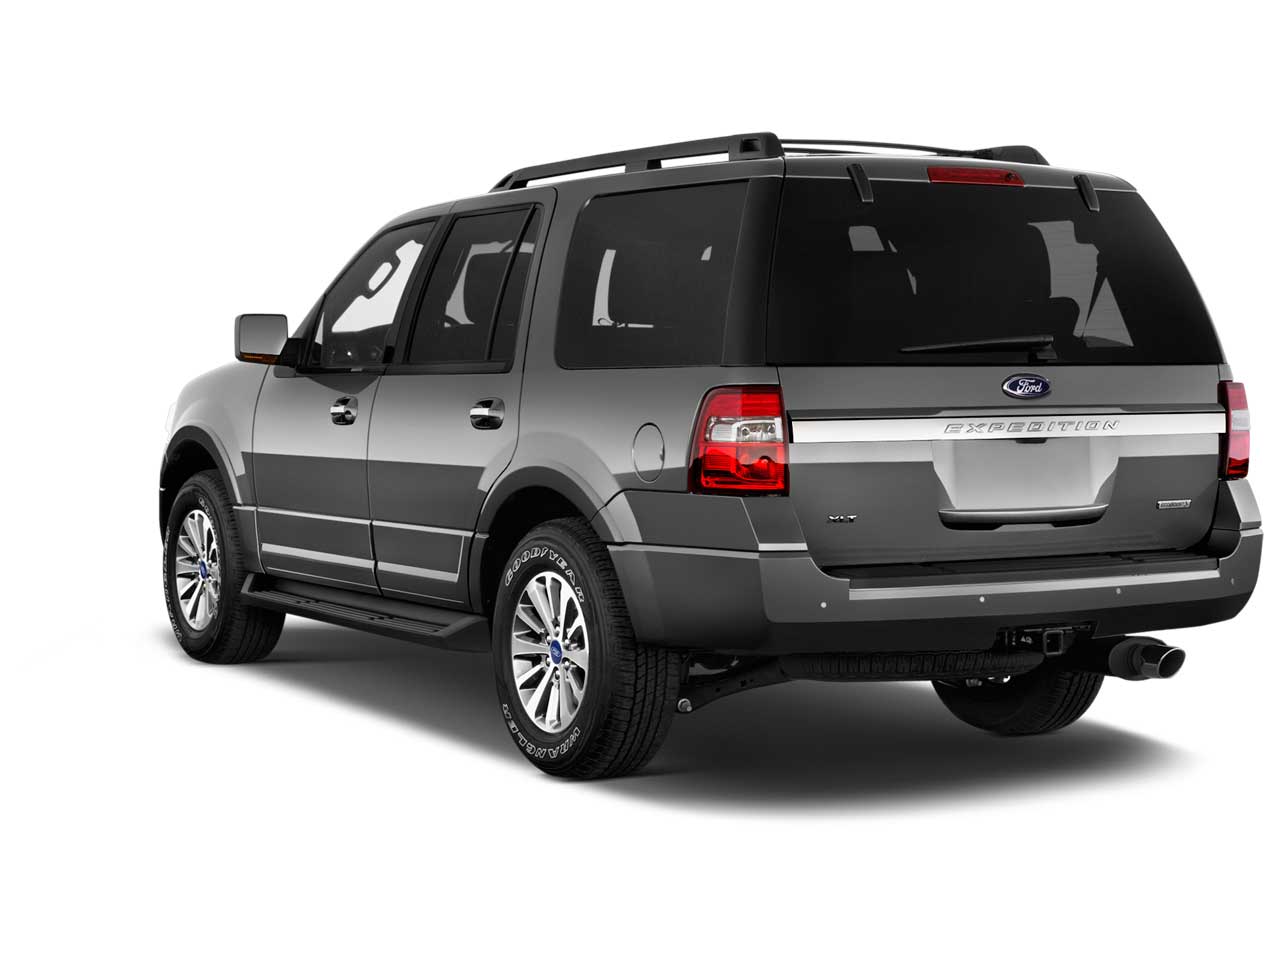 Ford Expedition Limited Exterior rear cross view